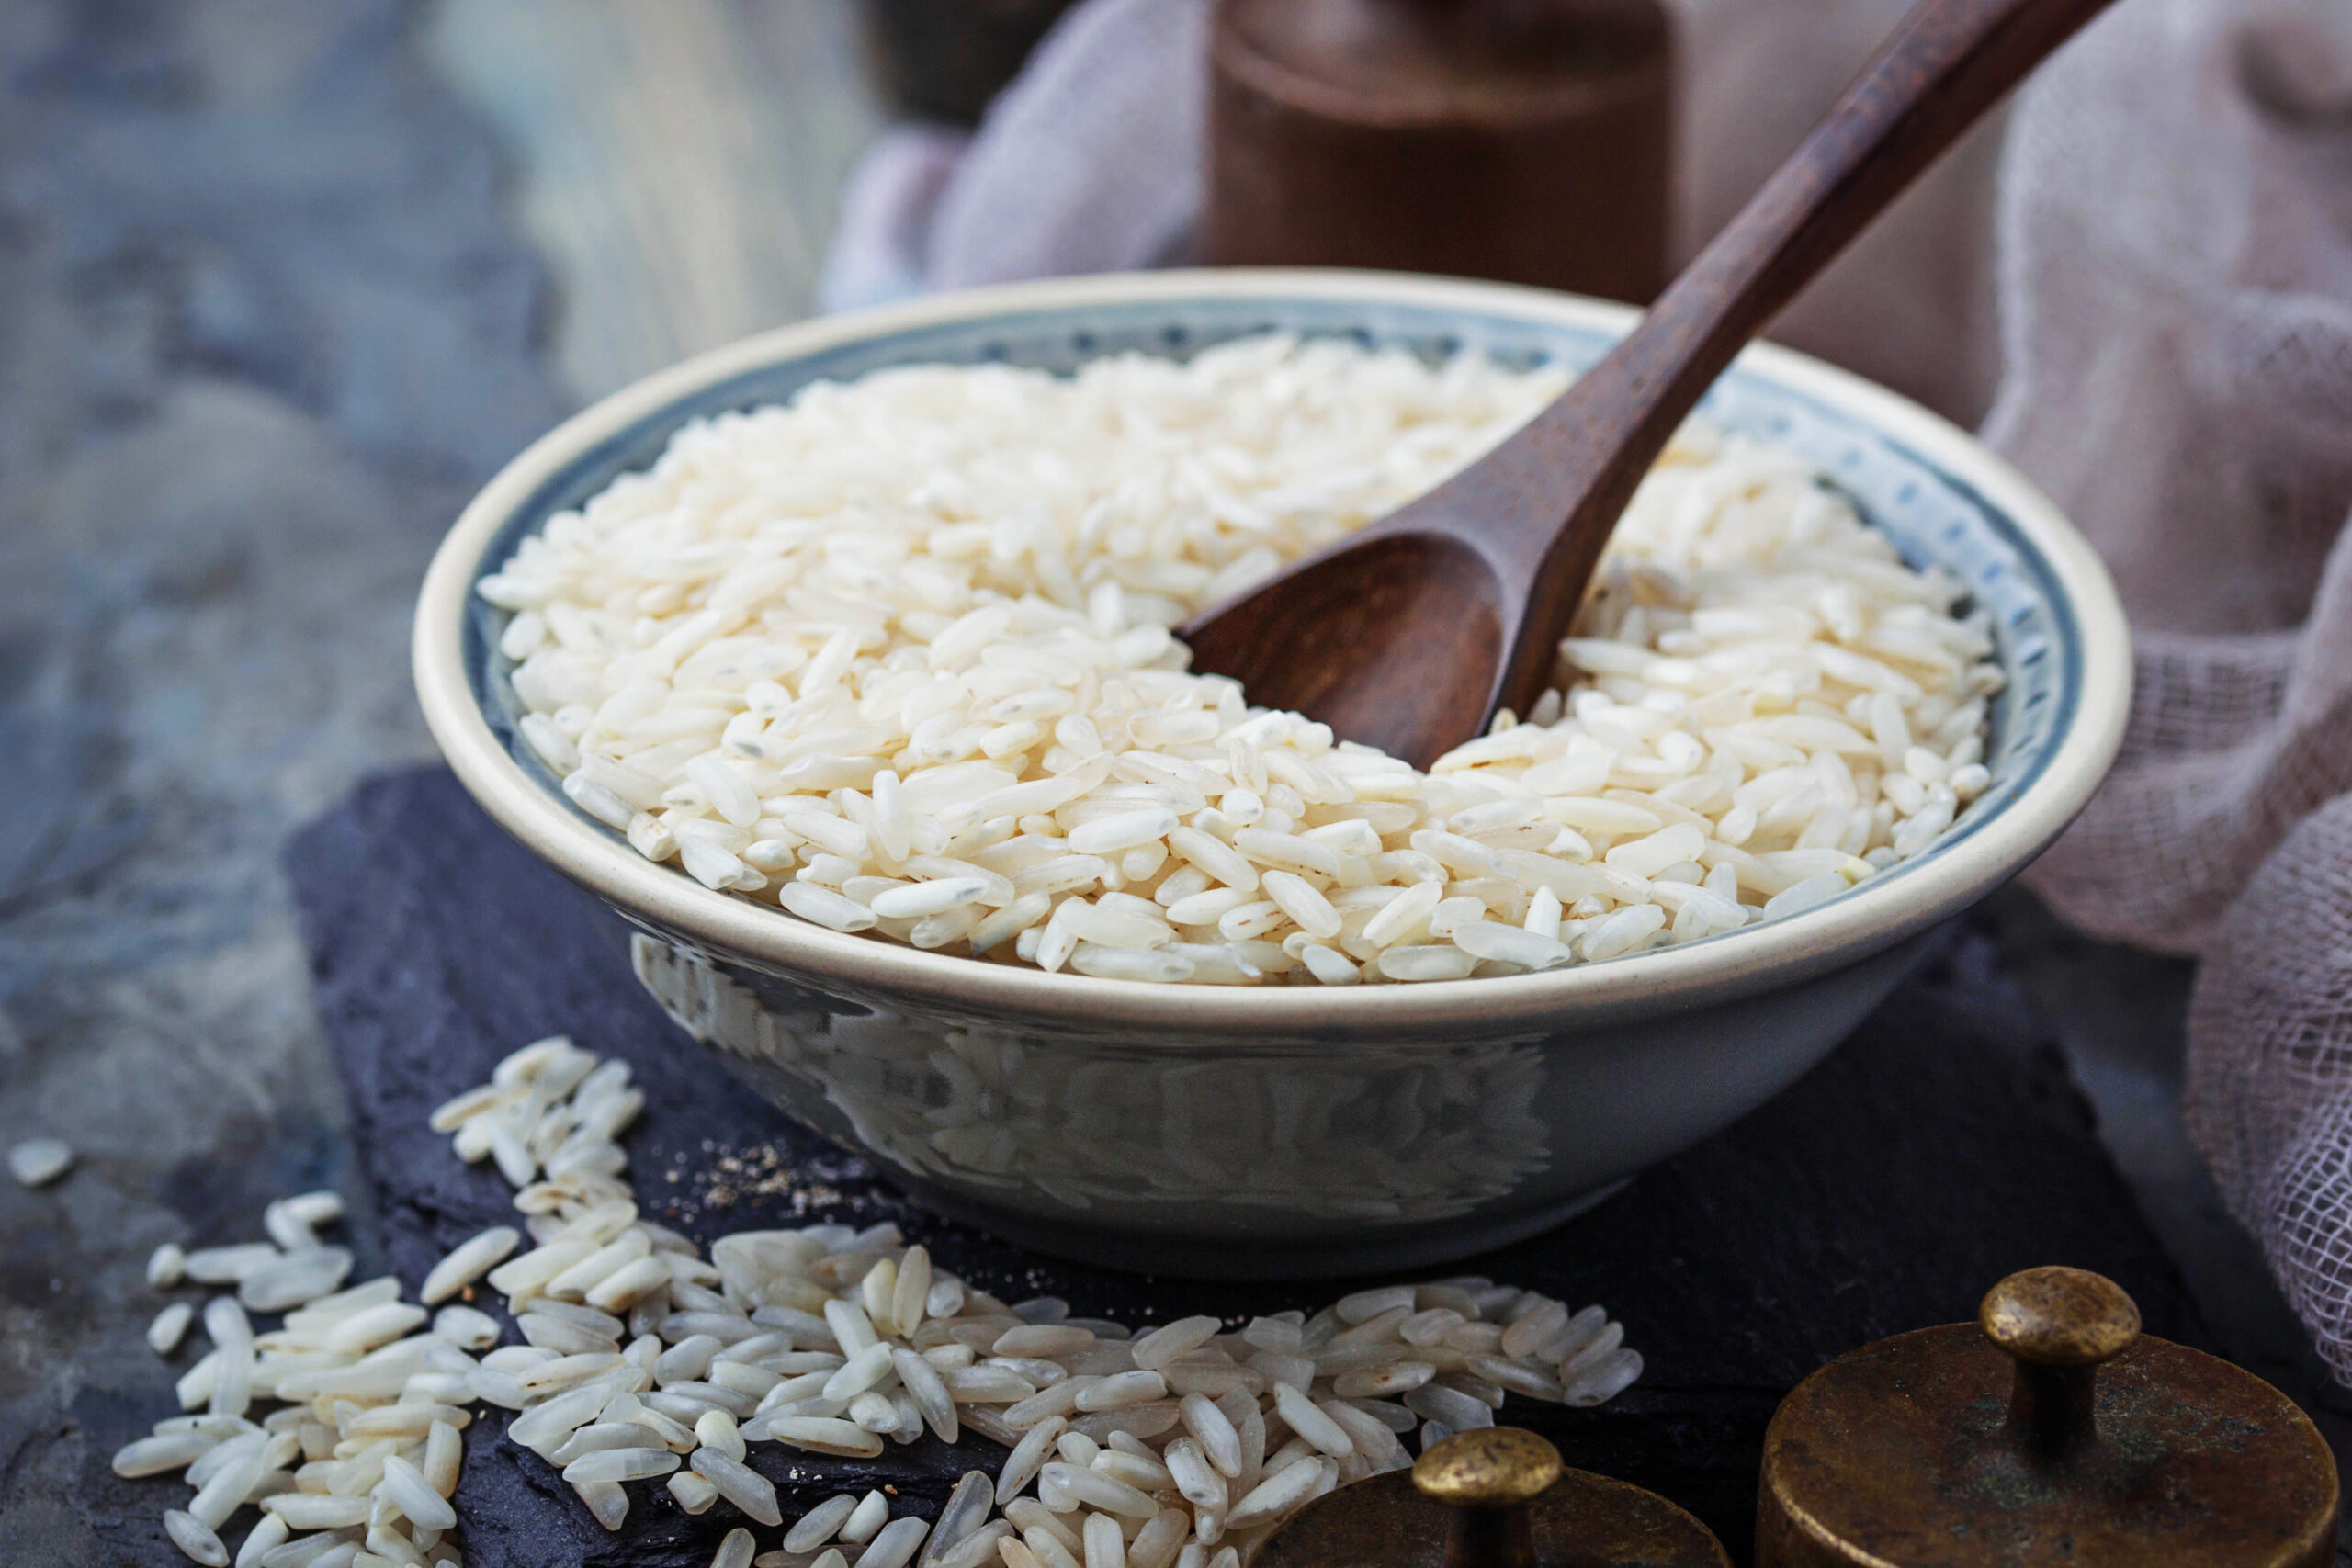 White uncooked rice on concrete background